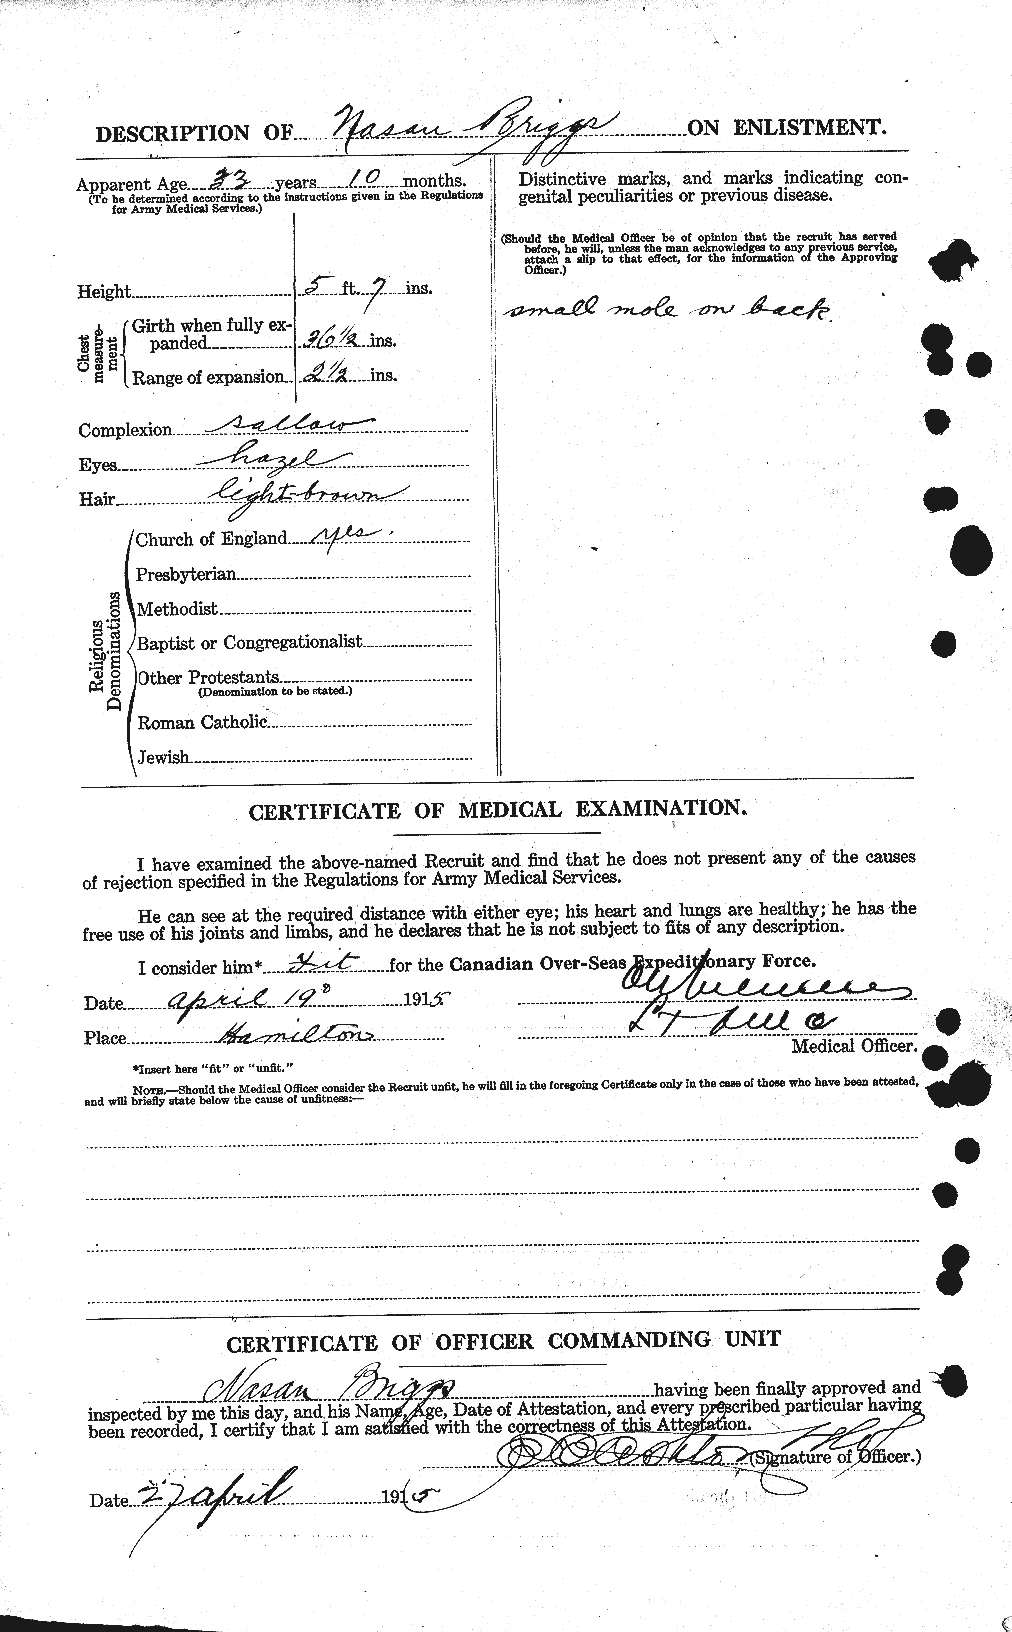 Personnel Records of the First World War - CEF 264077b